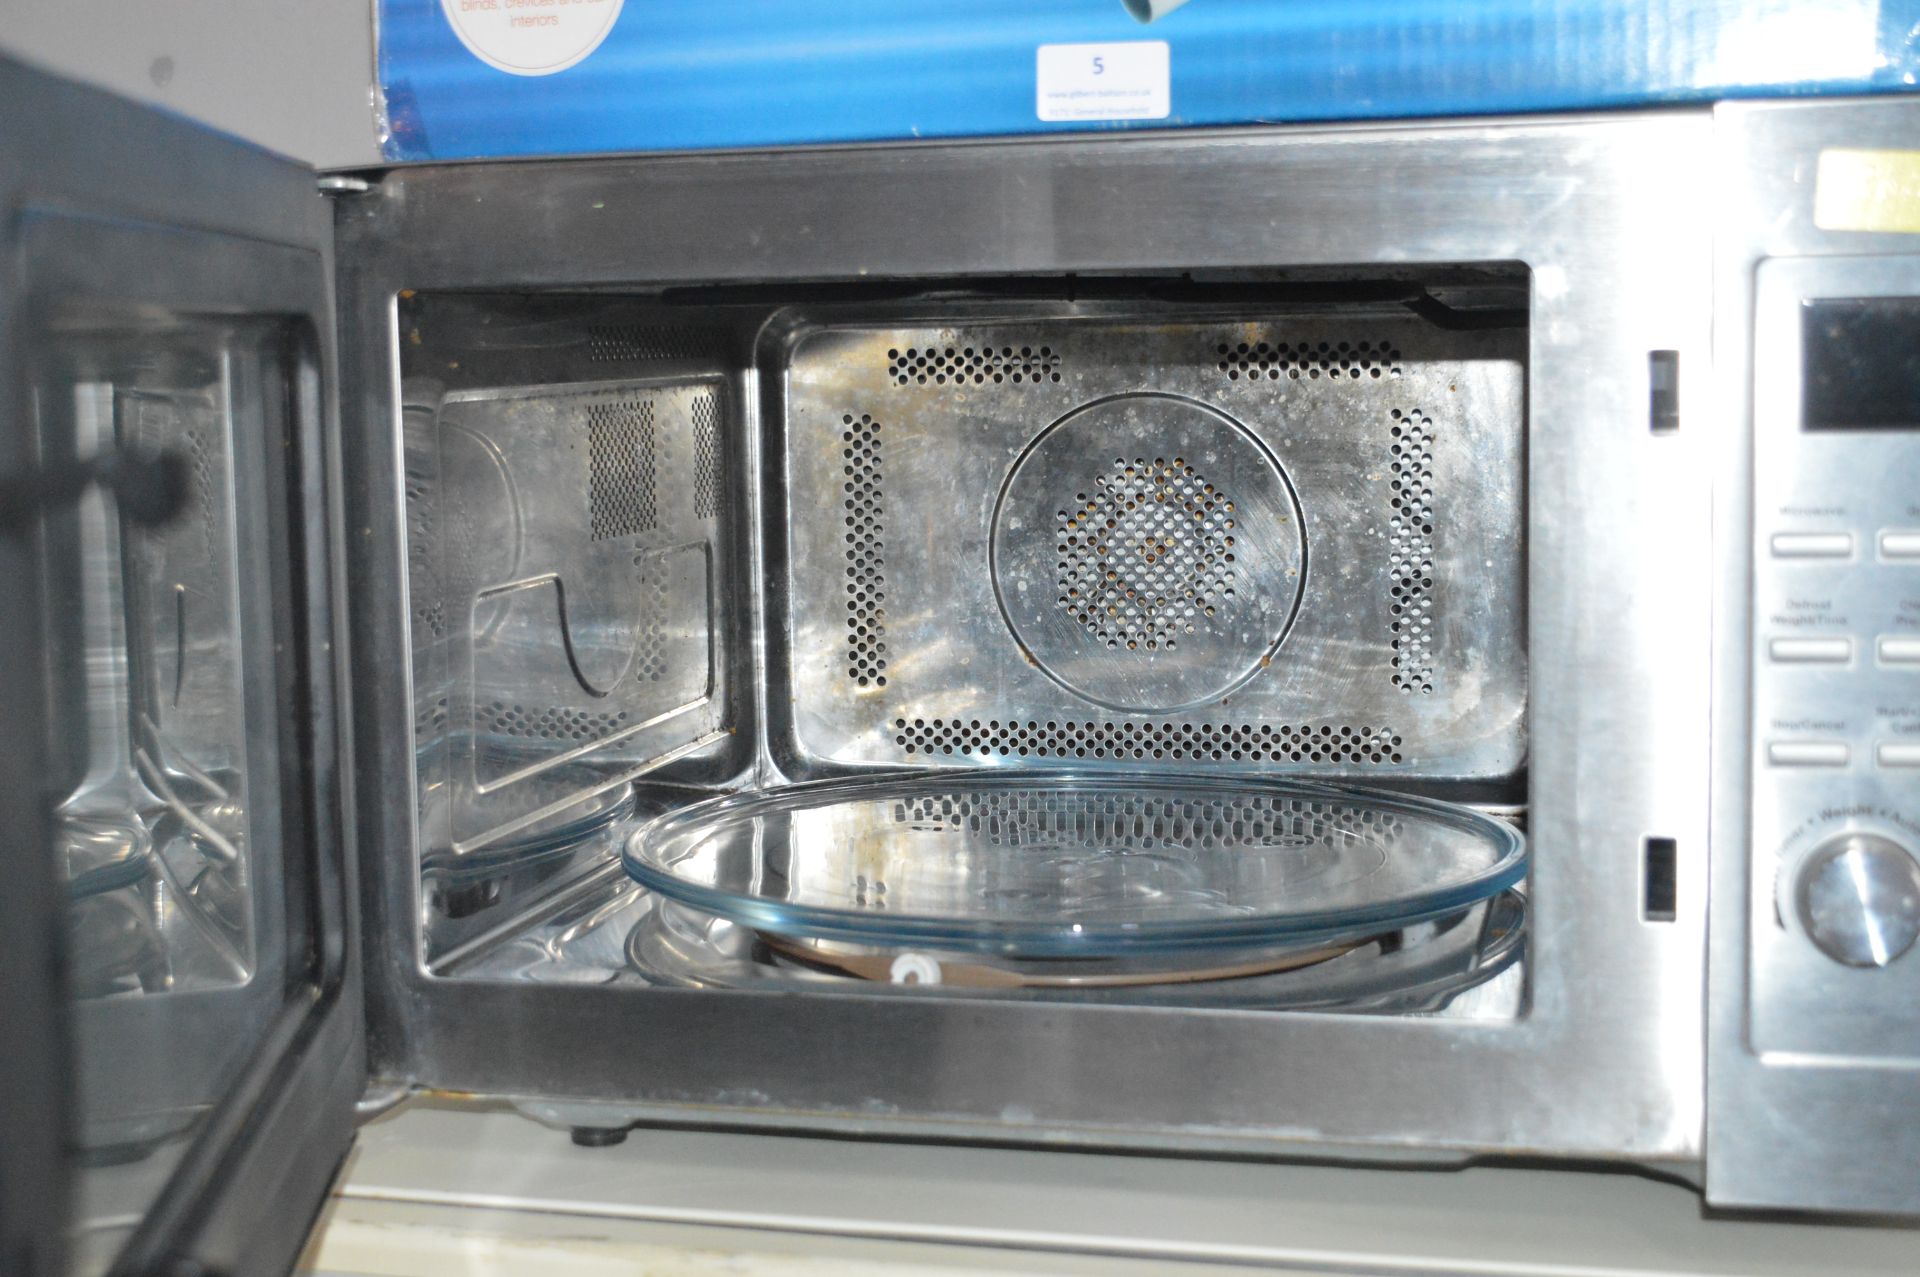 Delonghi Stainless Steel Microwave Oven - Image 2 of 2